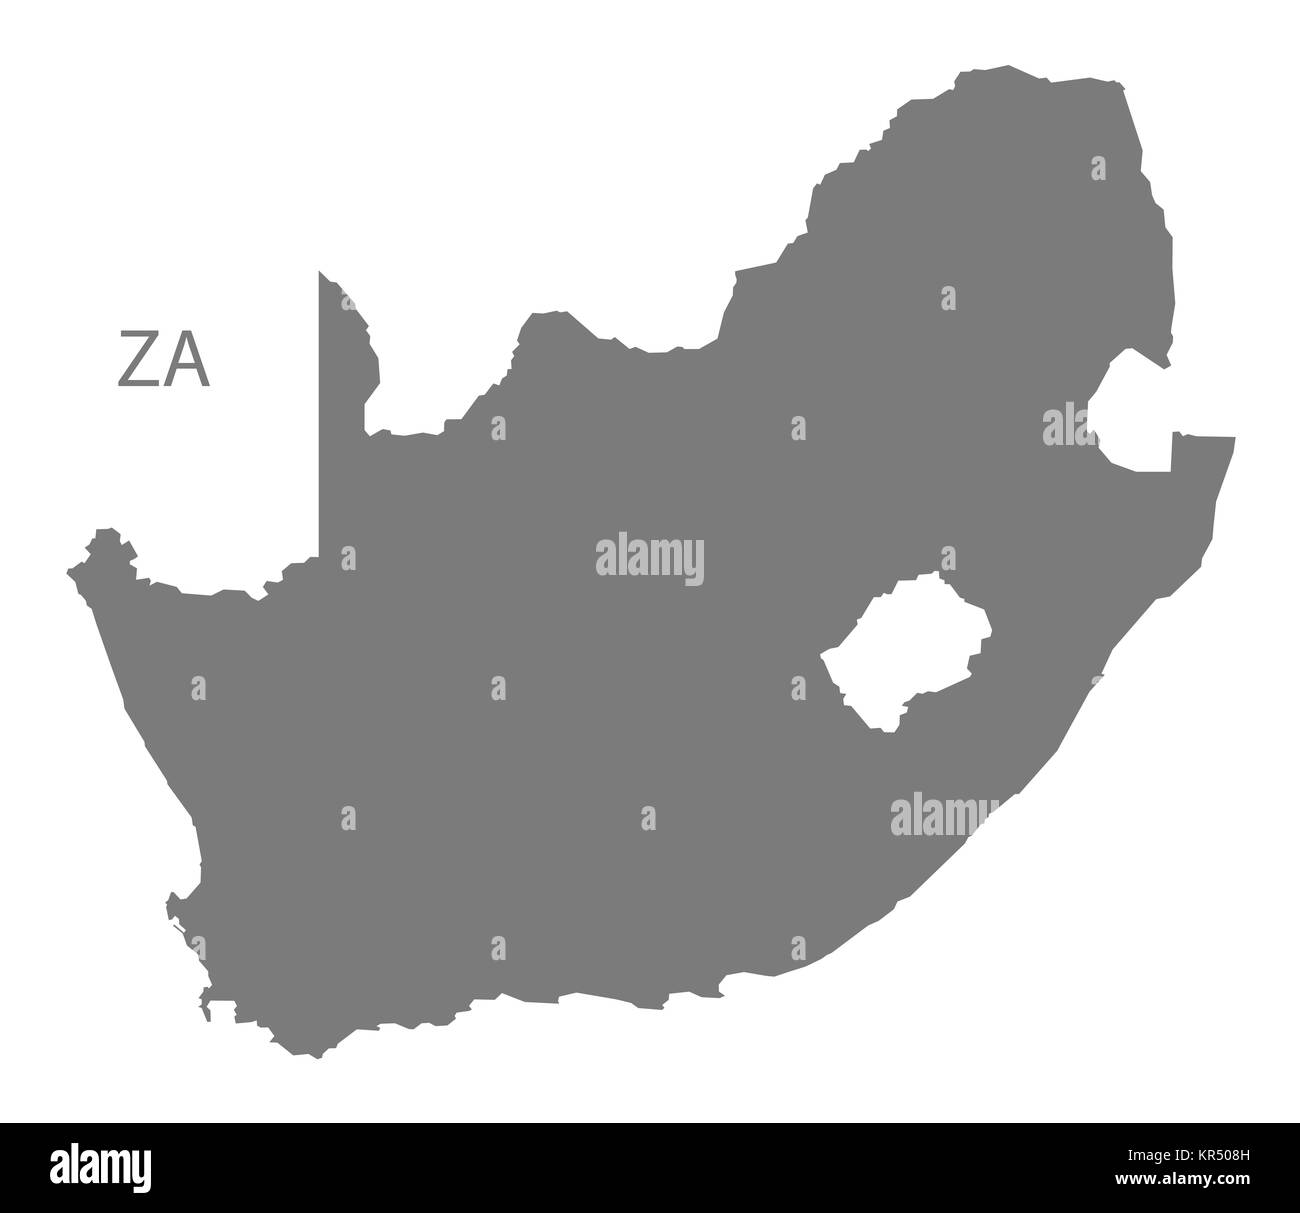 South Africa Map grey Stock Photo